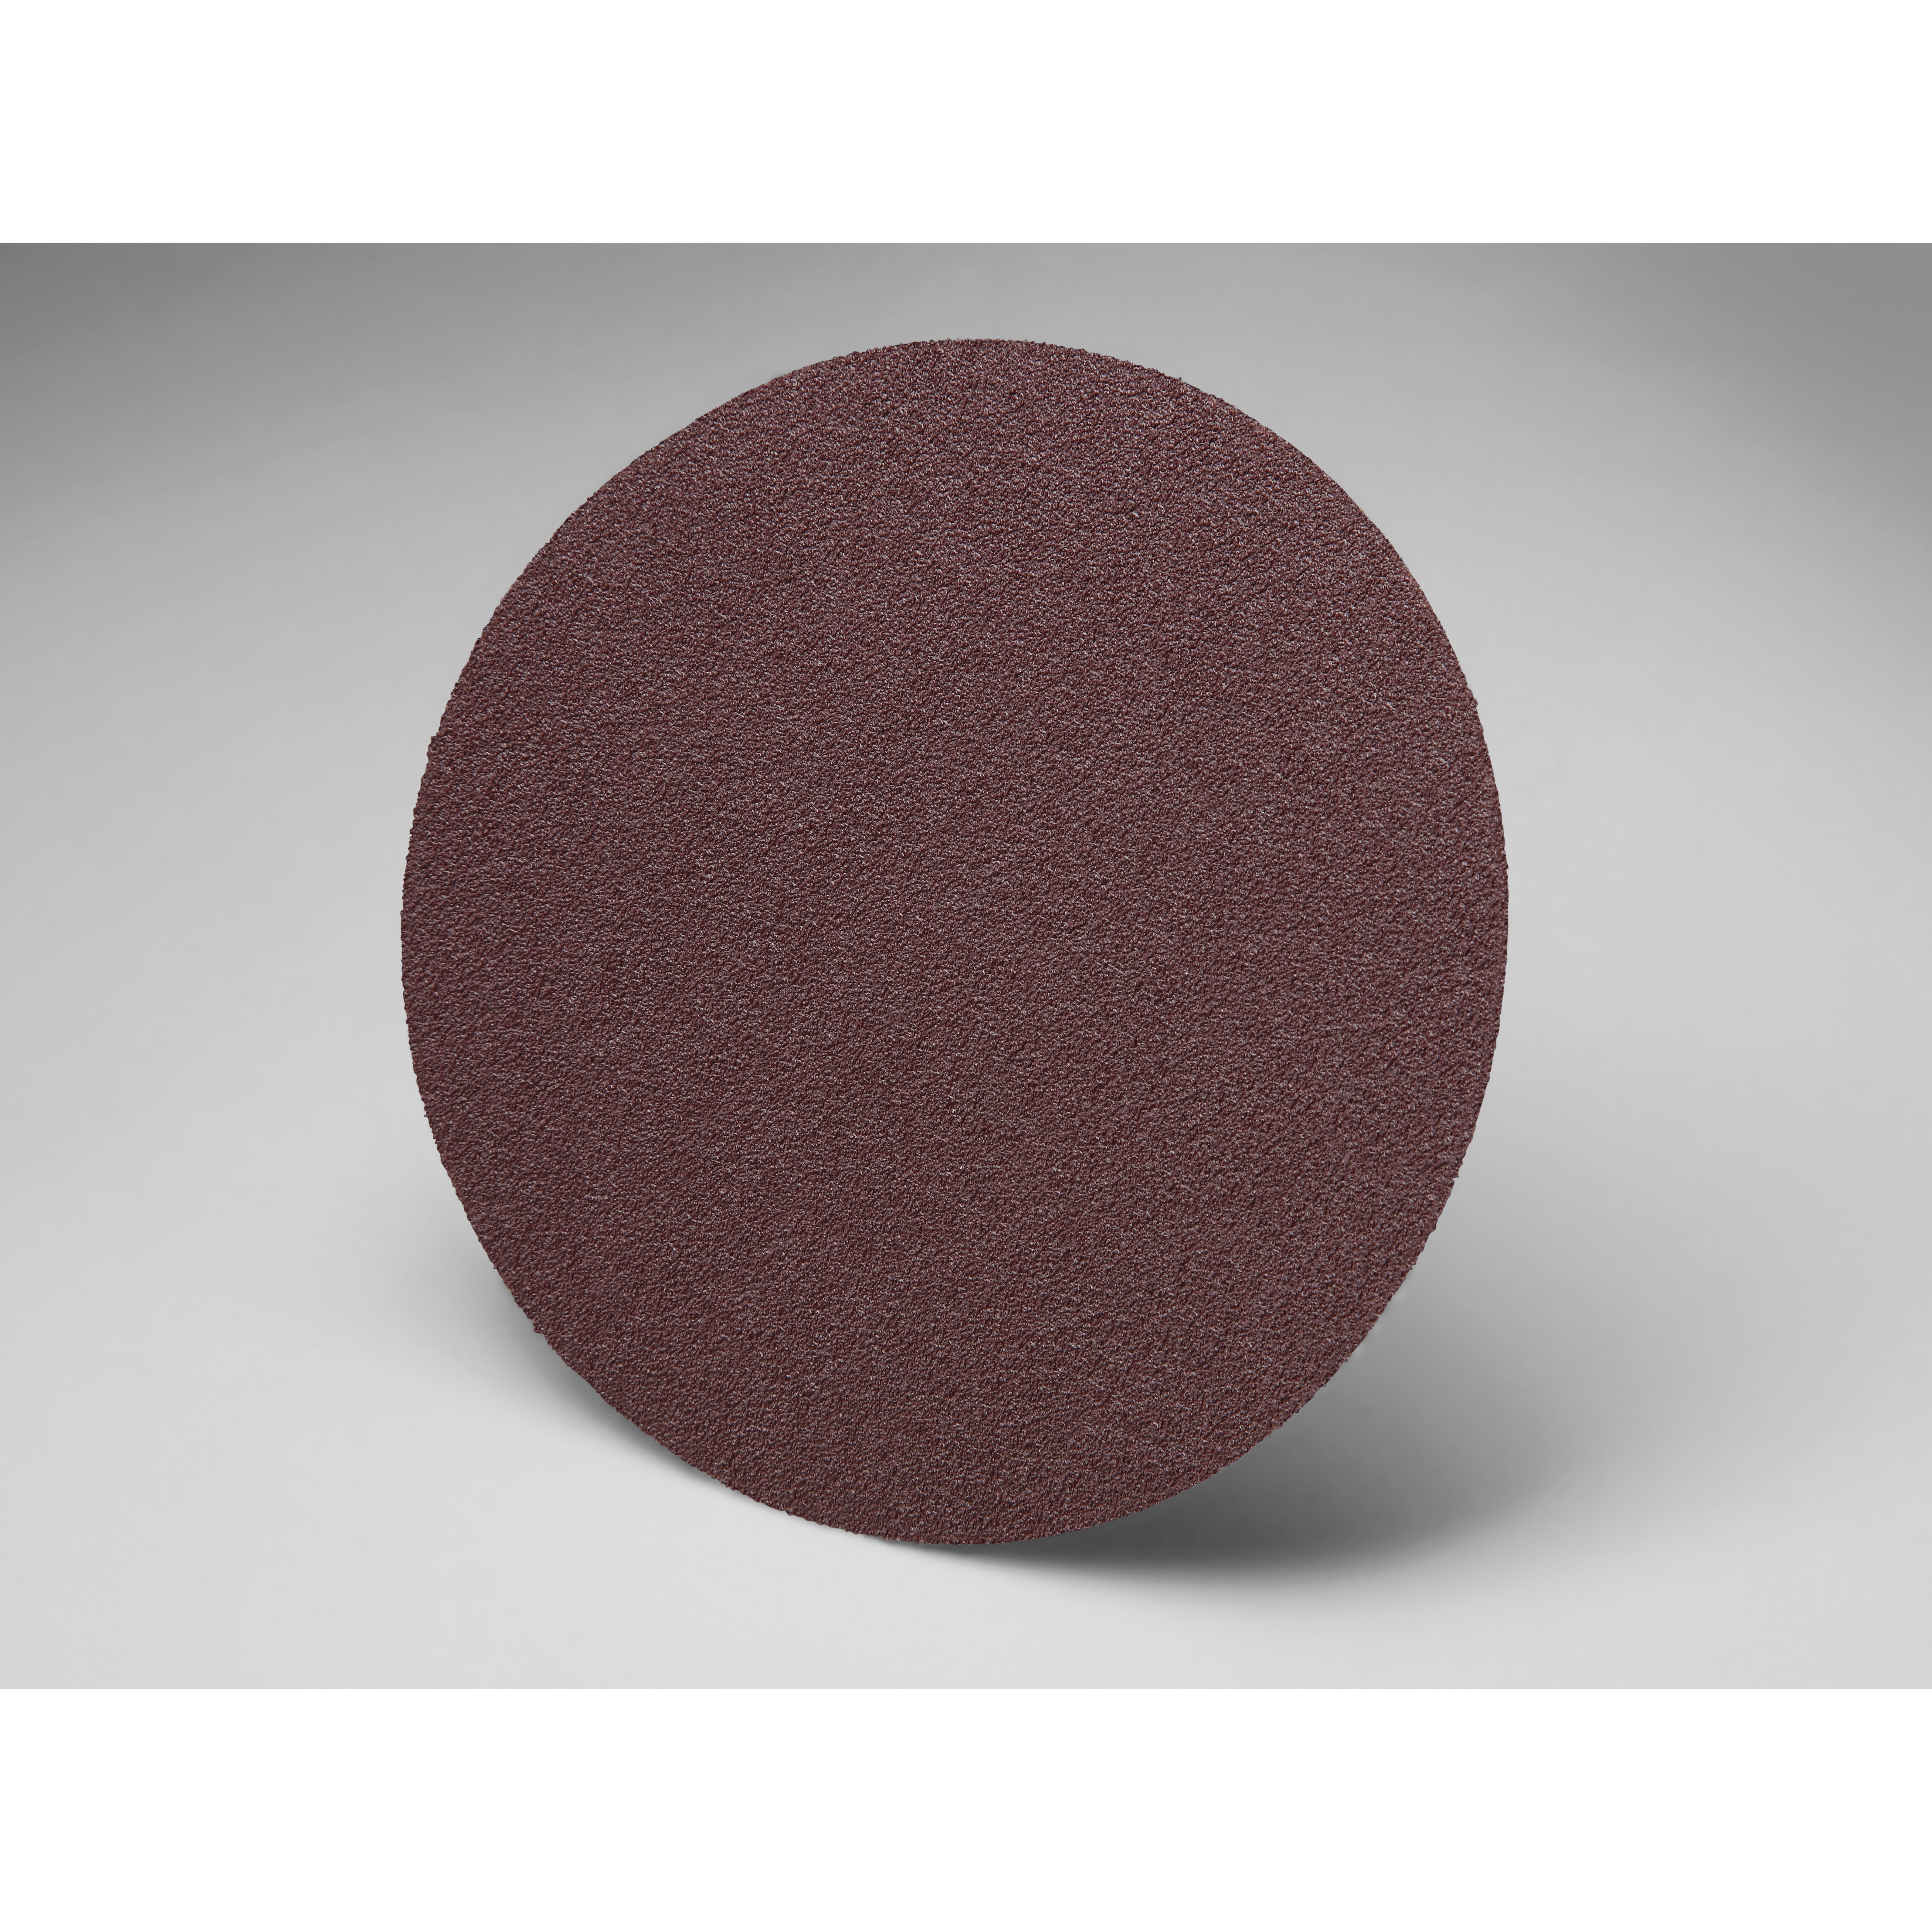 3M™ 051144-20884 348D Heavy Duty PSA Disc Pad Assembly, 5 in Dia Disc, P150 Grit, Very Fine Grade, Aluminum Oxide Abrasive, Cloth Backing